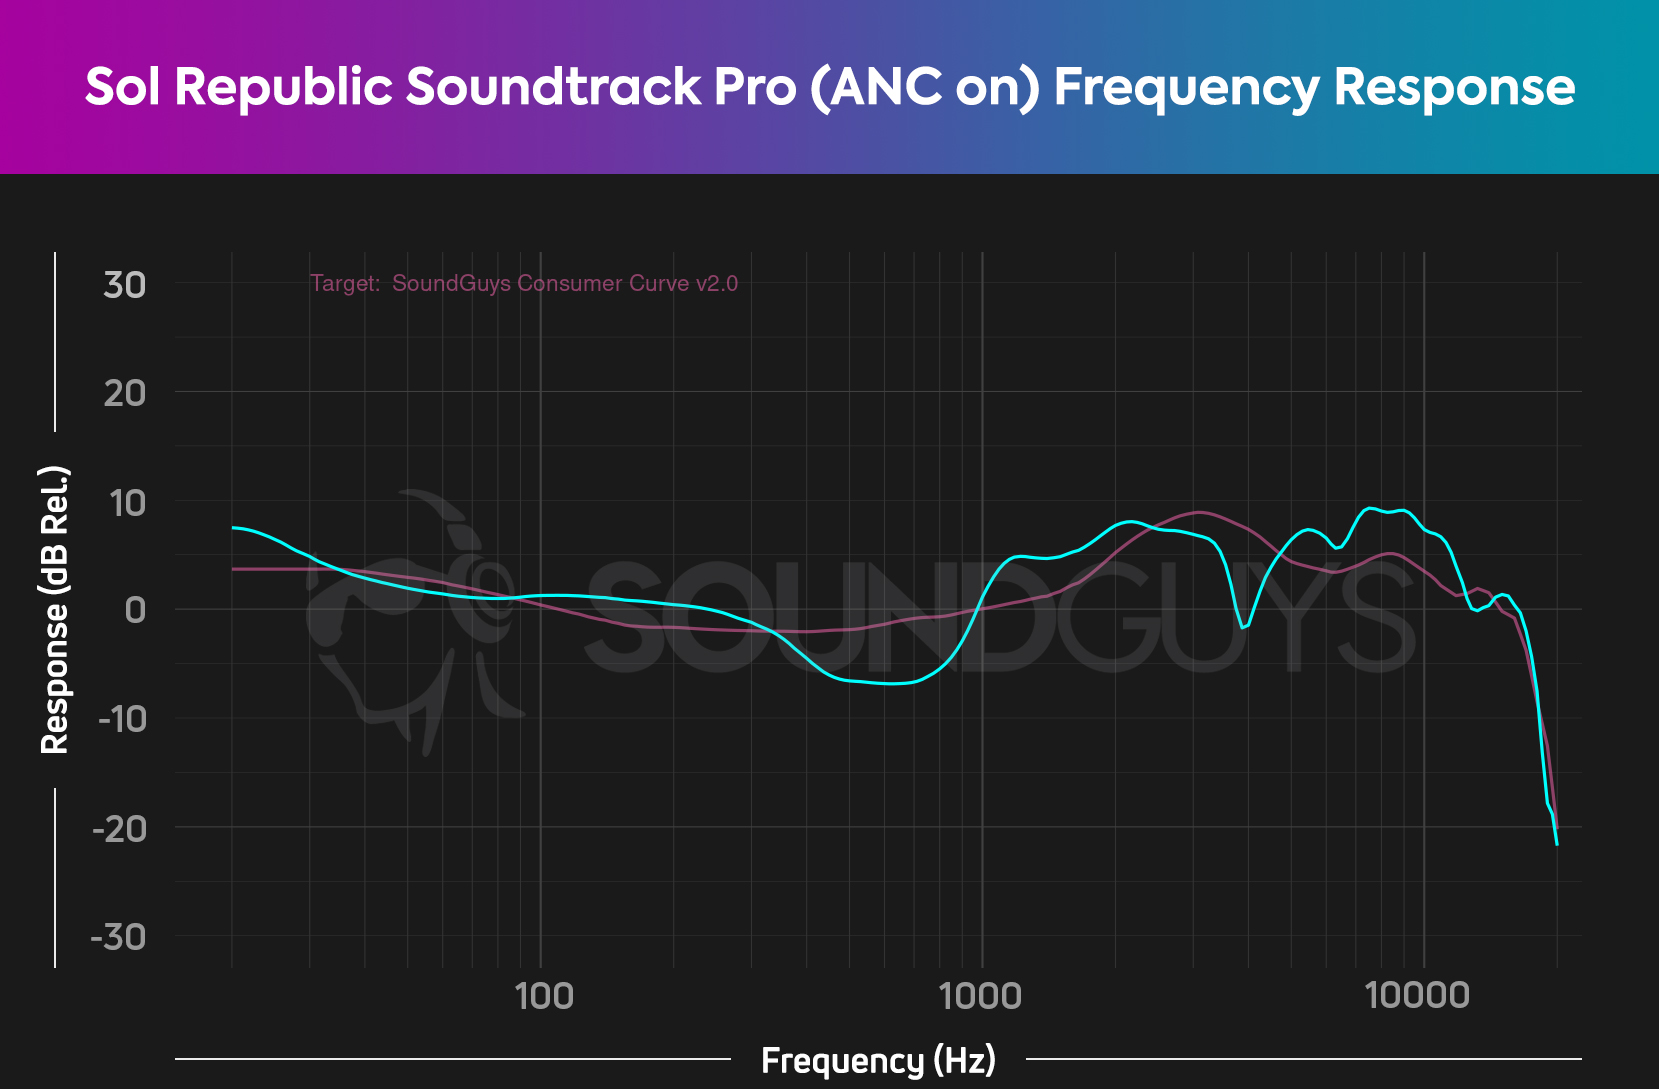 A chart showing the frequency response of the Sol Republic Soundtrack Pro with a significant dip in mid frequencies when ANC is turned on.